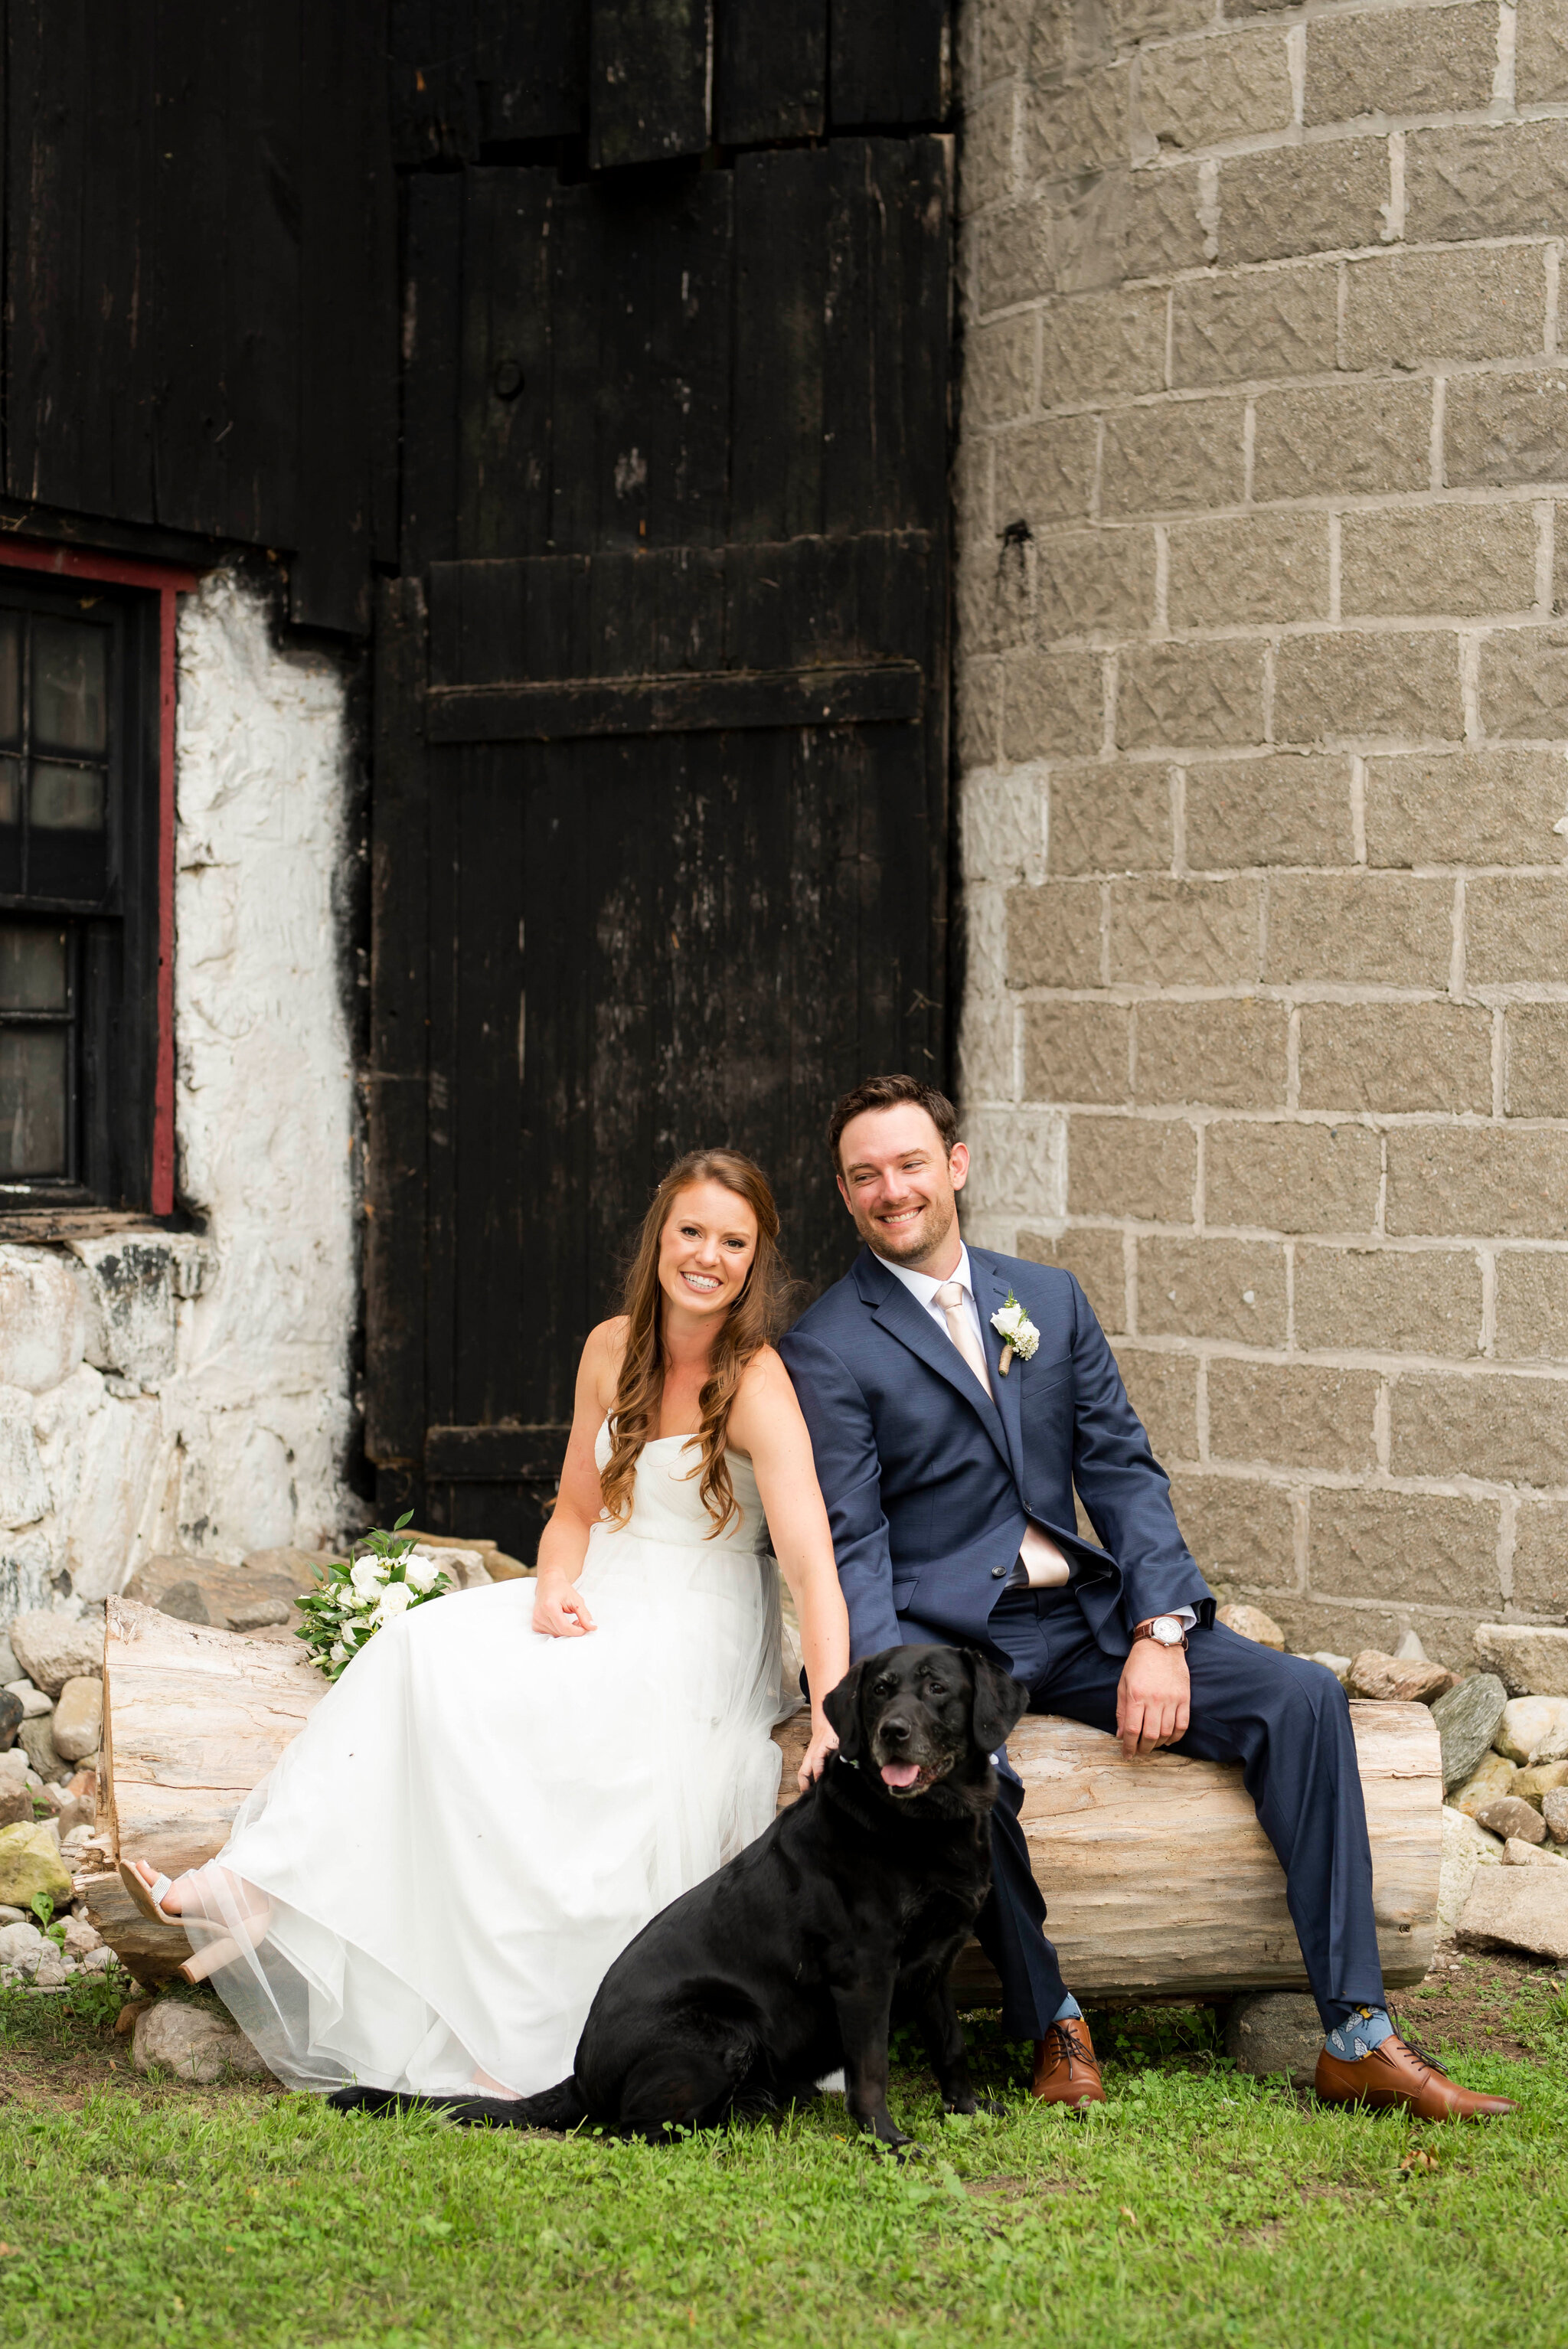 Bride and groom pose with dog outside barn